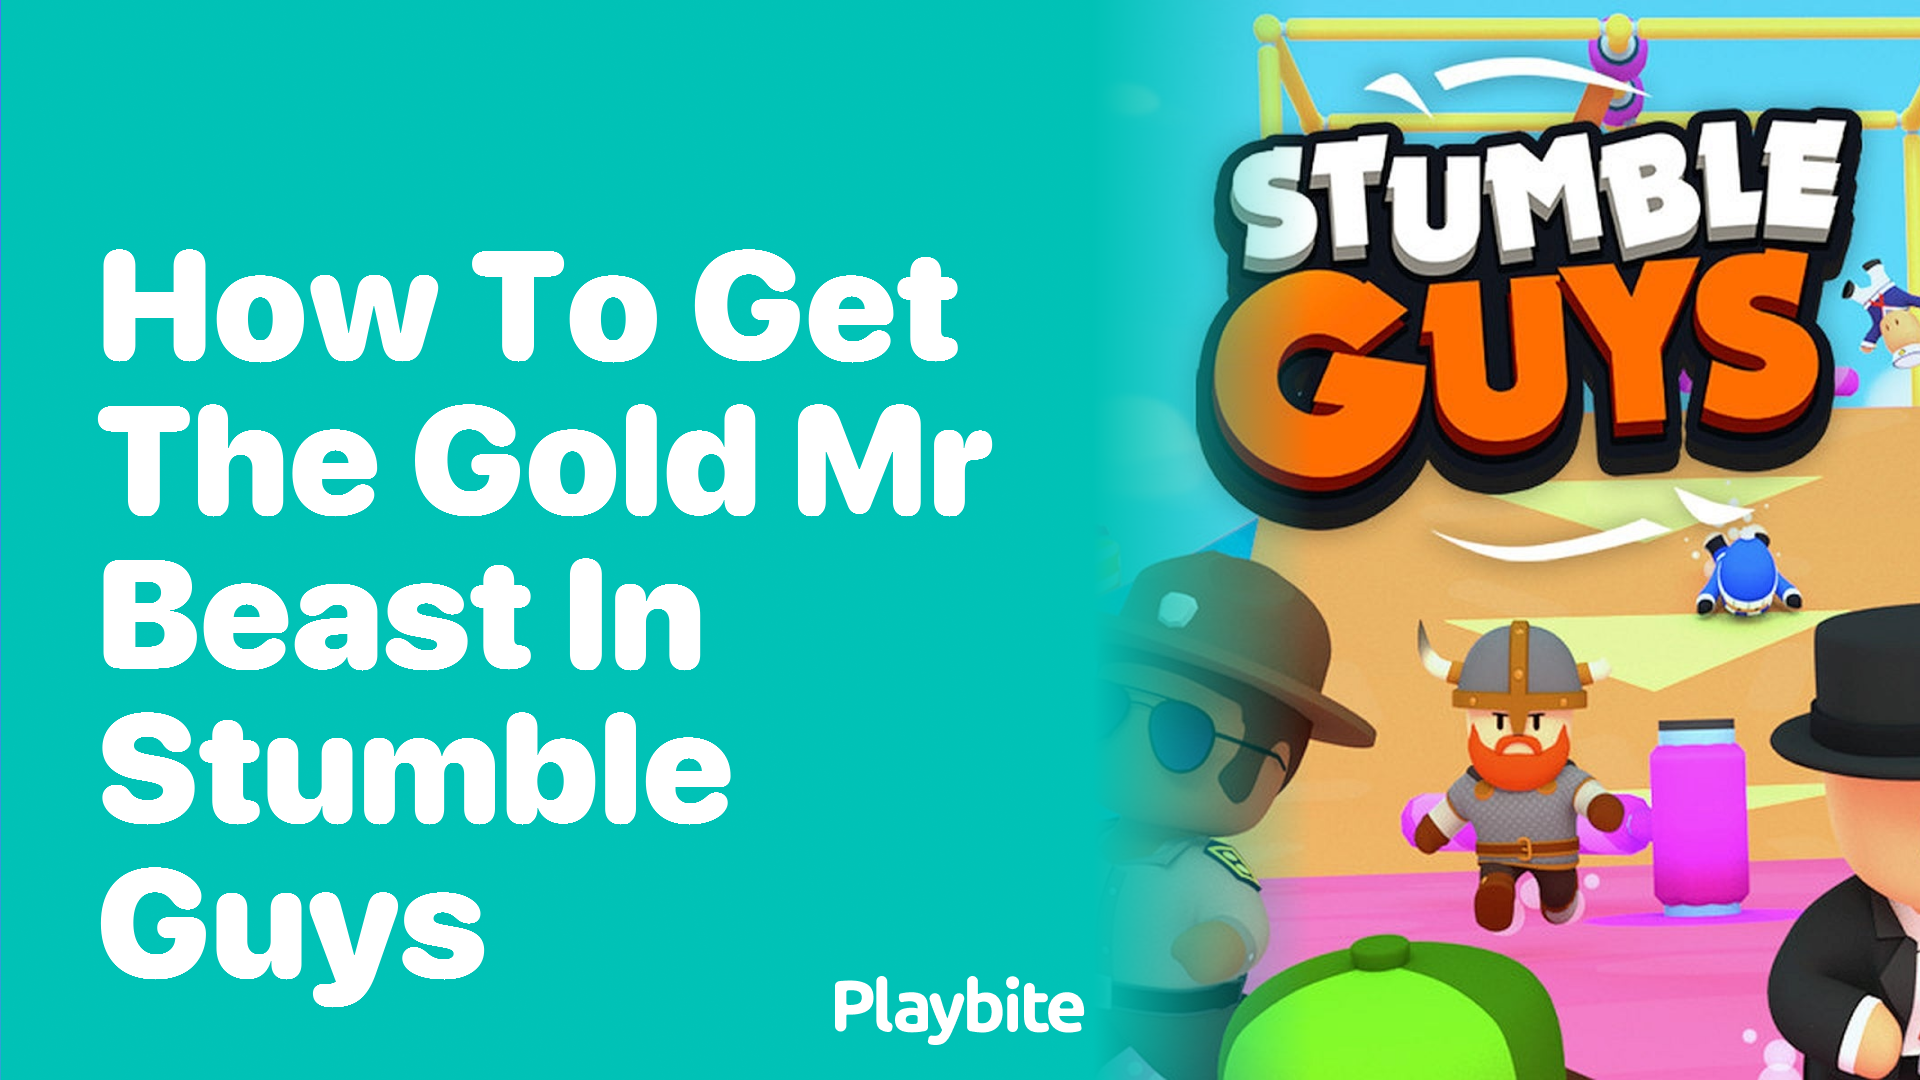 How to Get the Gold Mr. Beast in Stumble Guys